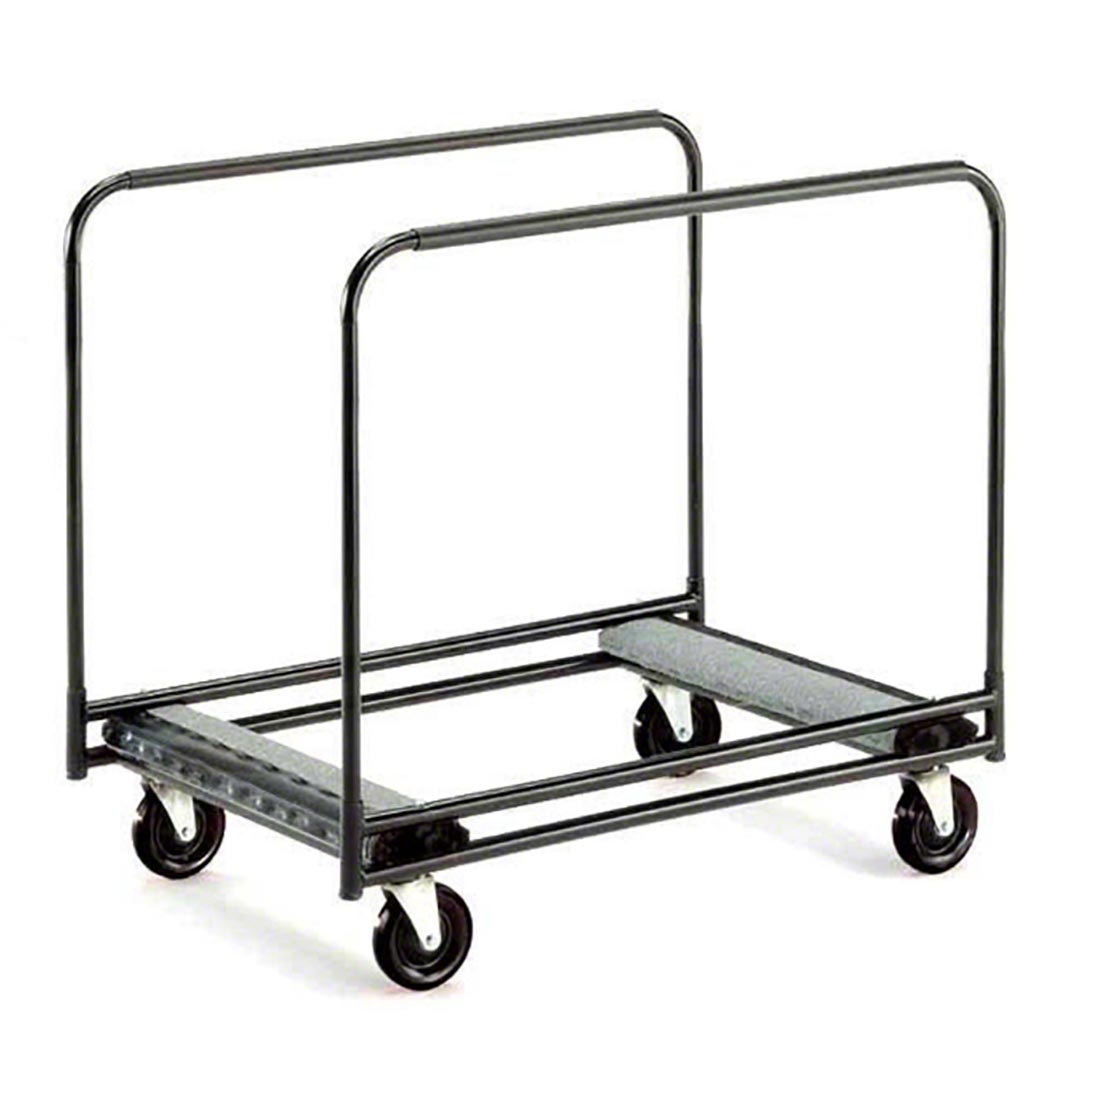 Buy Black Storage Caddy from the Next UK online shop